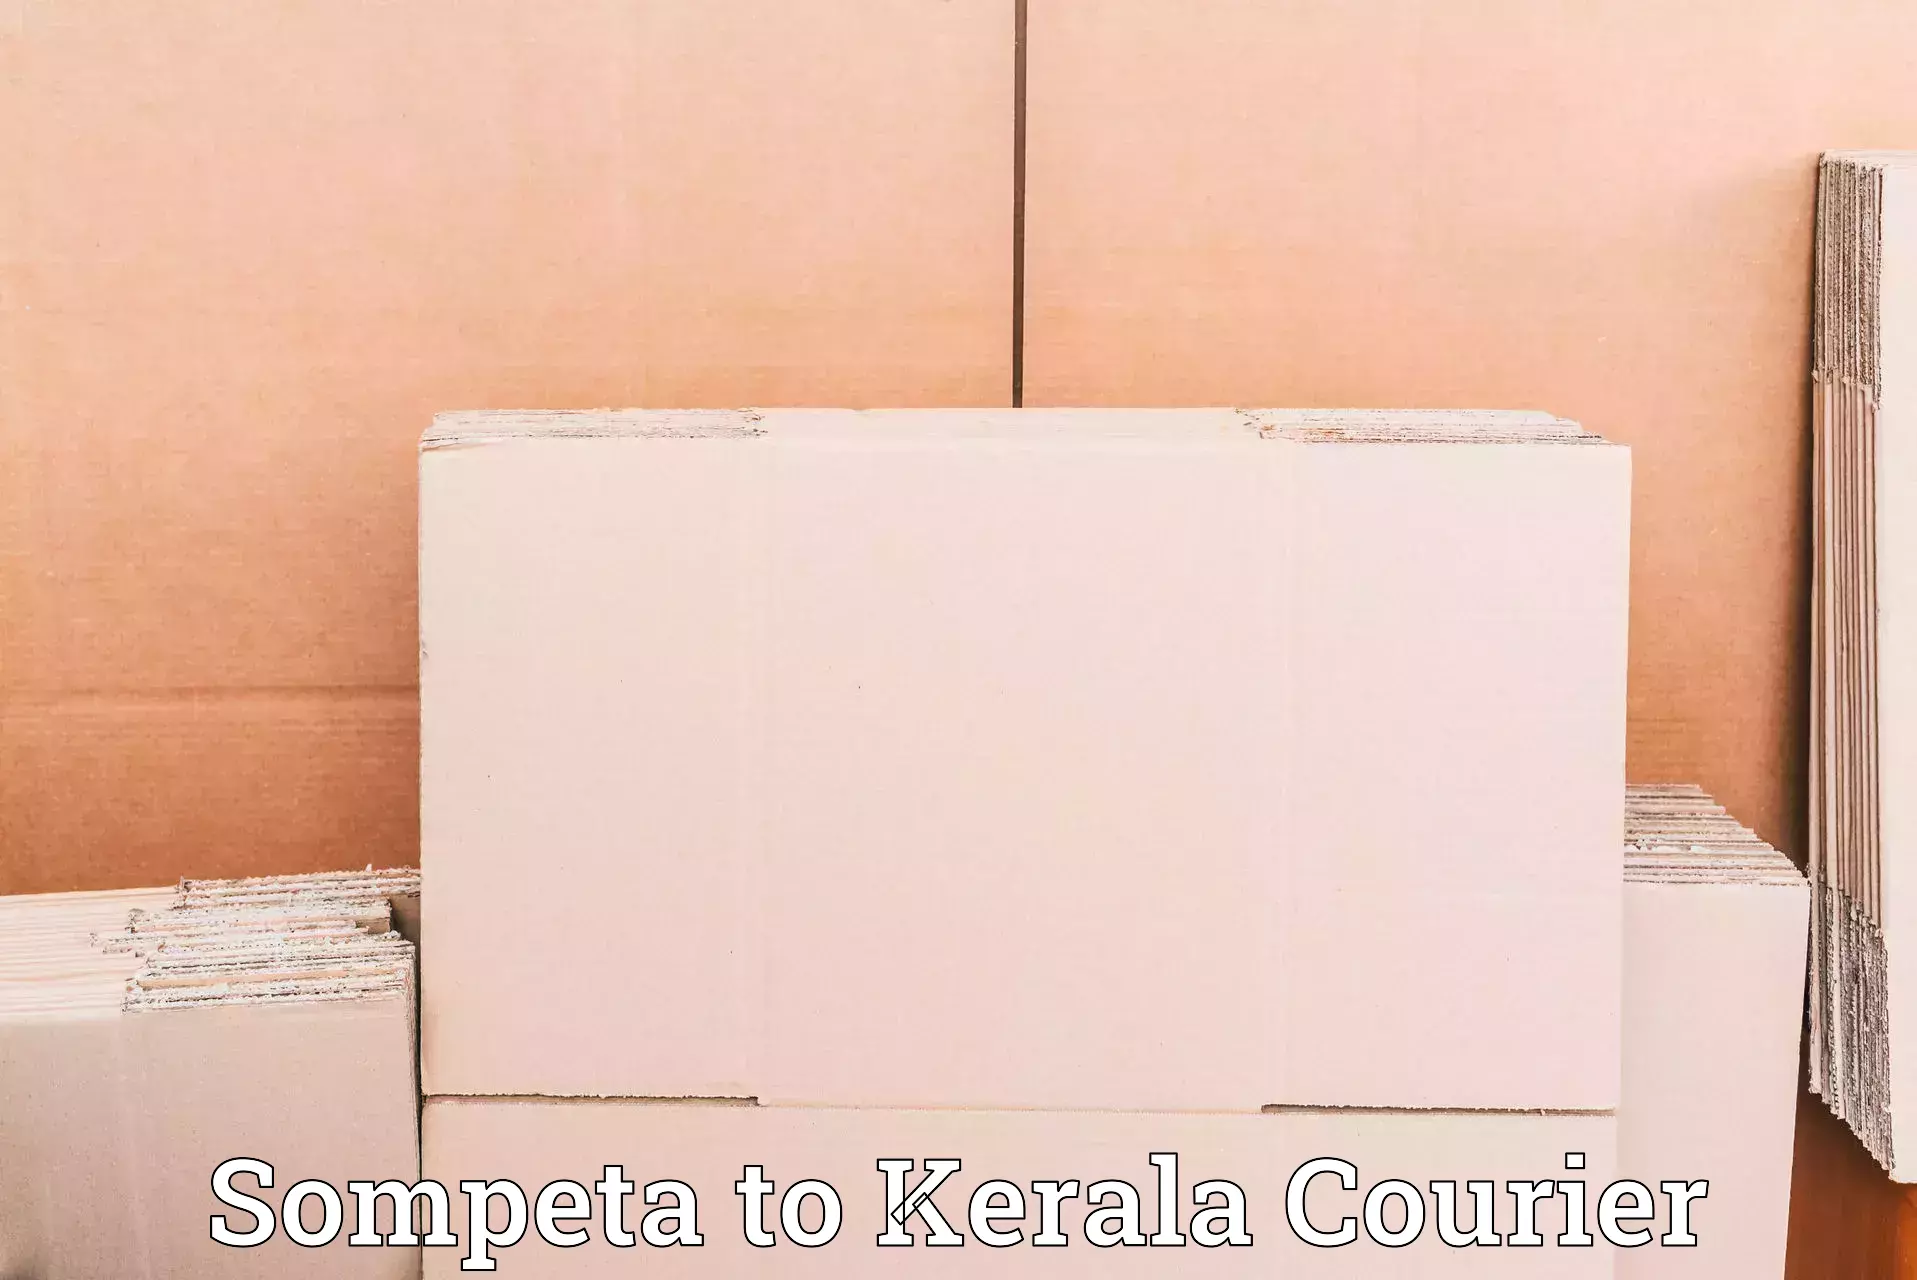 State-of-the-art courier technology Sompeta to Cochin University of Science and Technology